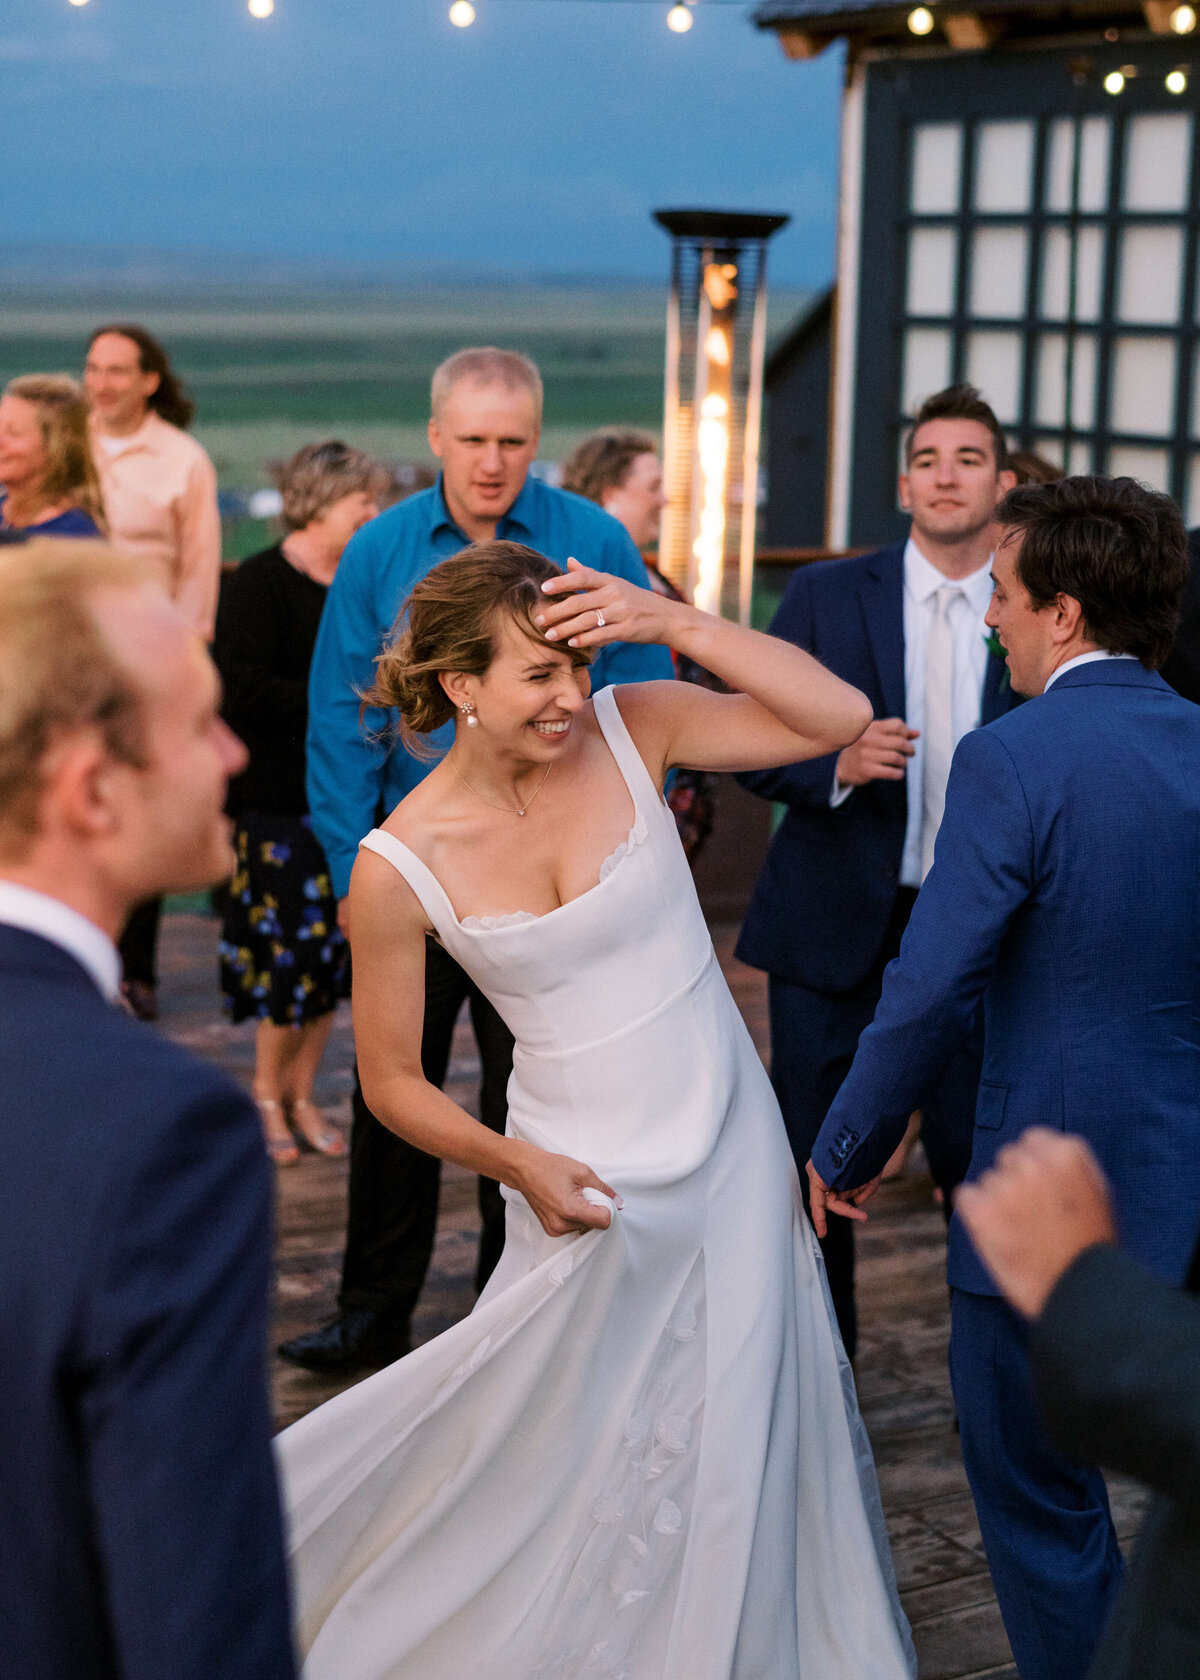 Virginia wedding photographer takes a fun image of a bride dancing with her friends during their outdoor reception